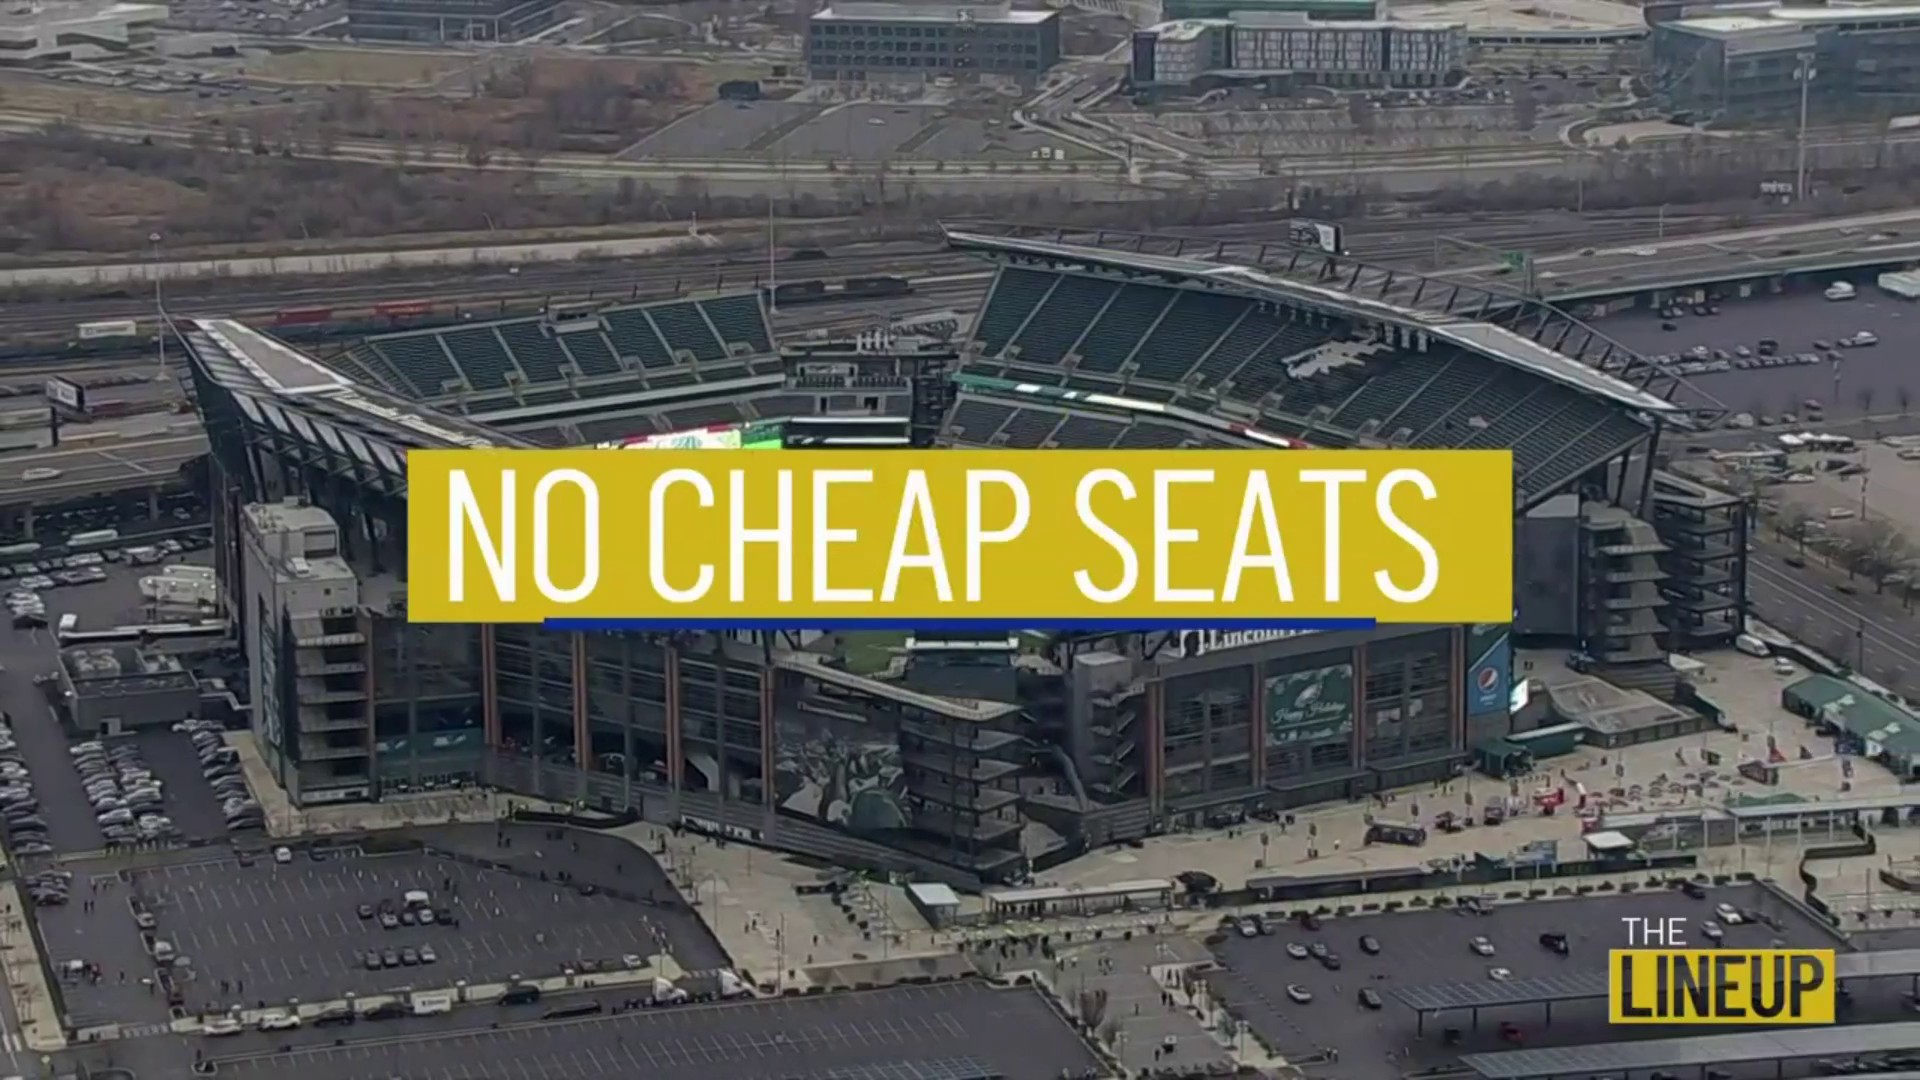 No Cheap Seats for Eagles Playoff Game: The Lineup – NBC10 Philadelphia